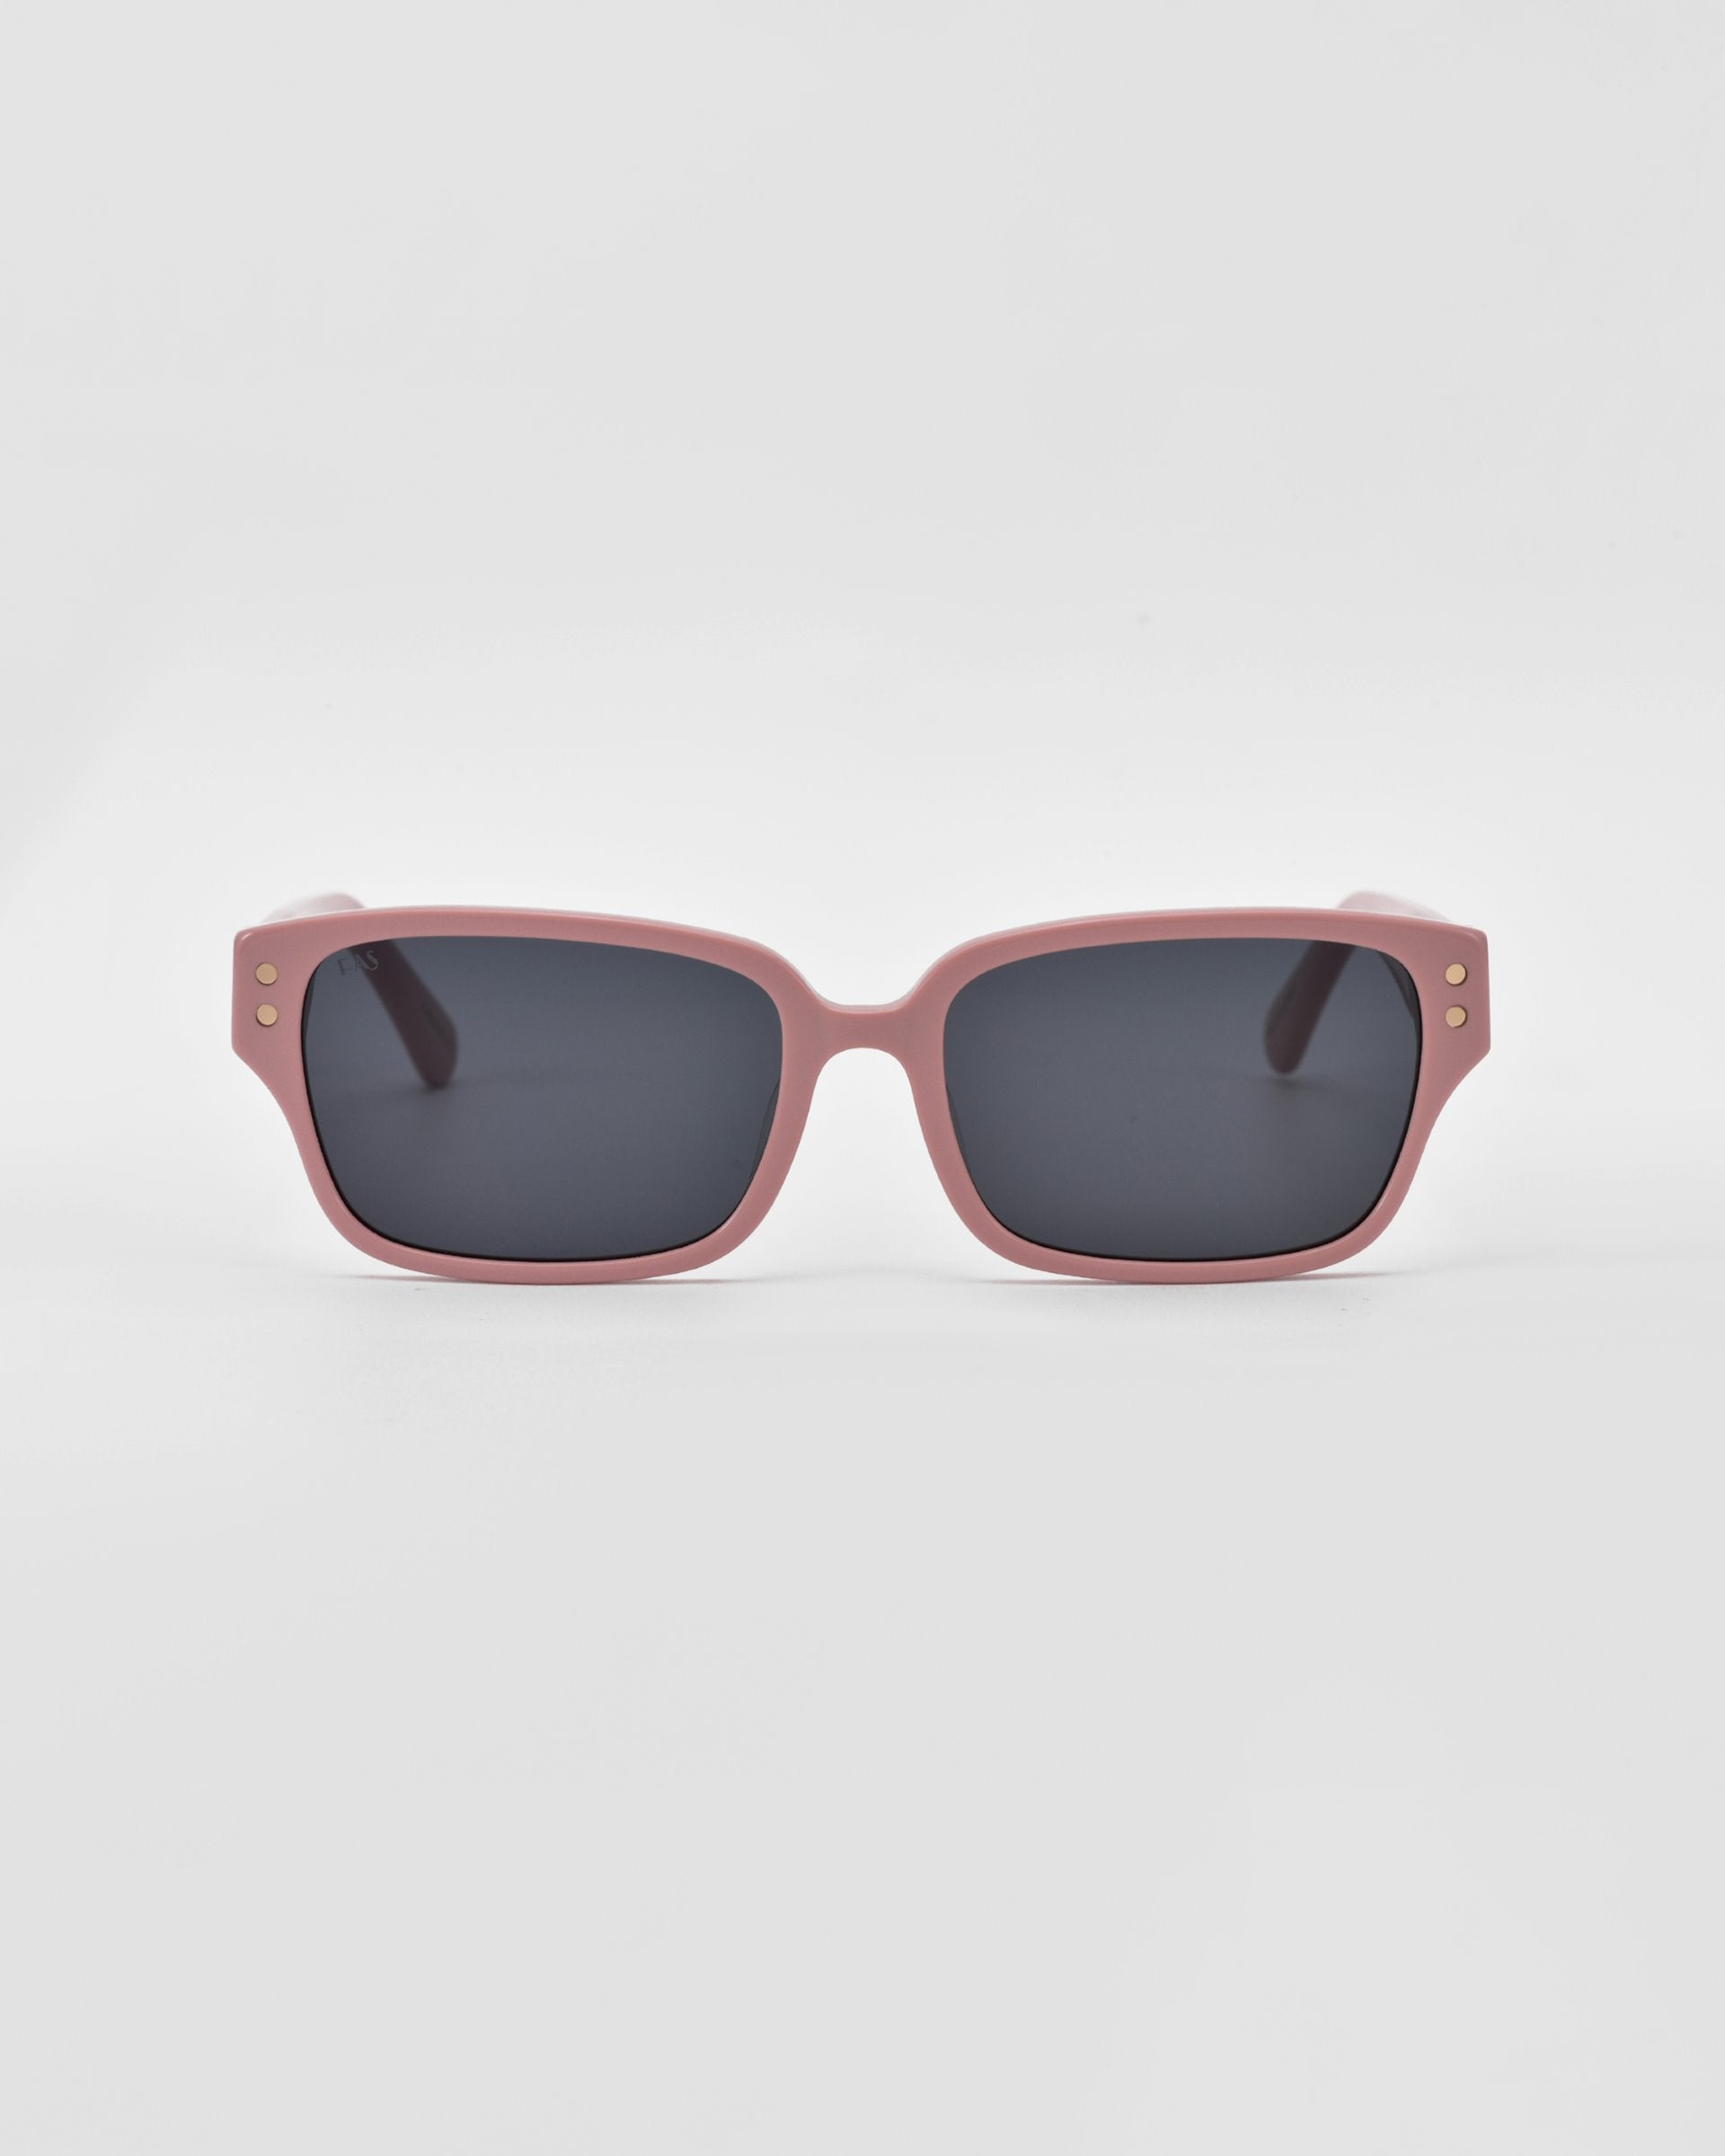 These For Art&#39;s Sake® Zenith sunglasses feature light pink square frames with chunky chain detailing and dark lenses. The corners of the handcrafted acetate frames have two small circular metal accents near the temples. The background is plain white.